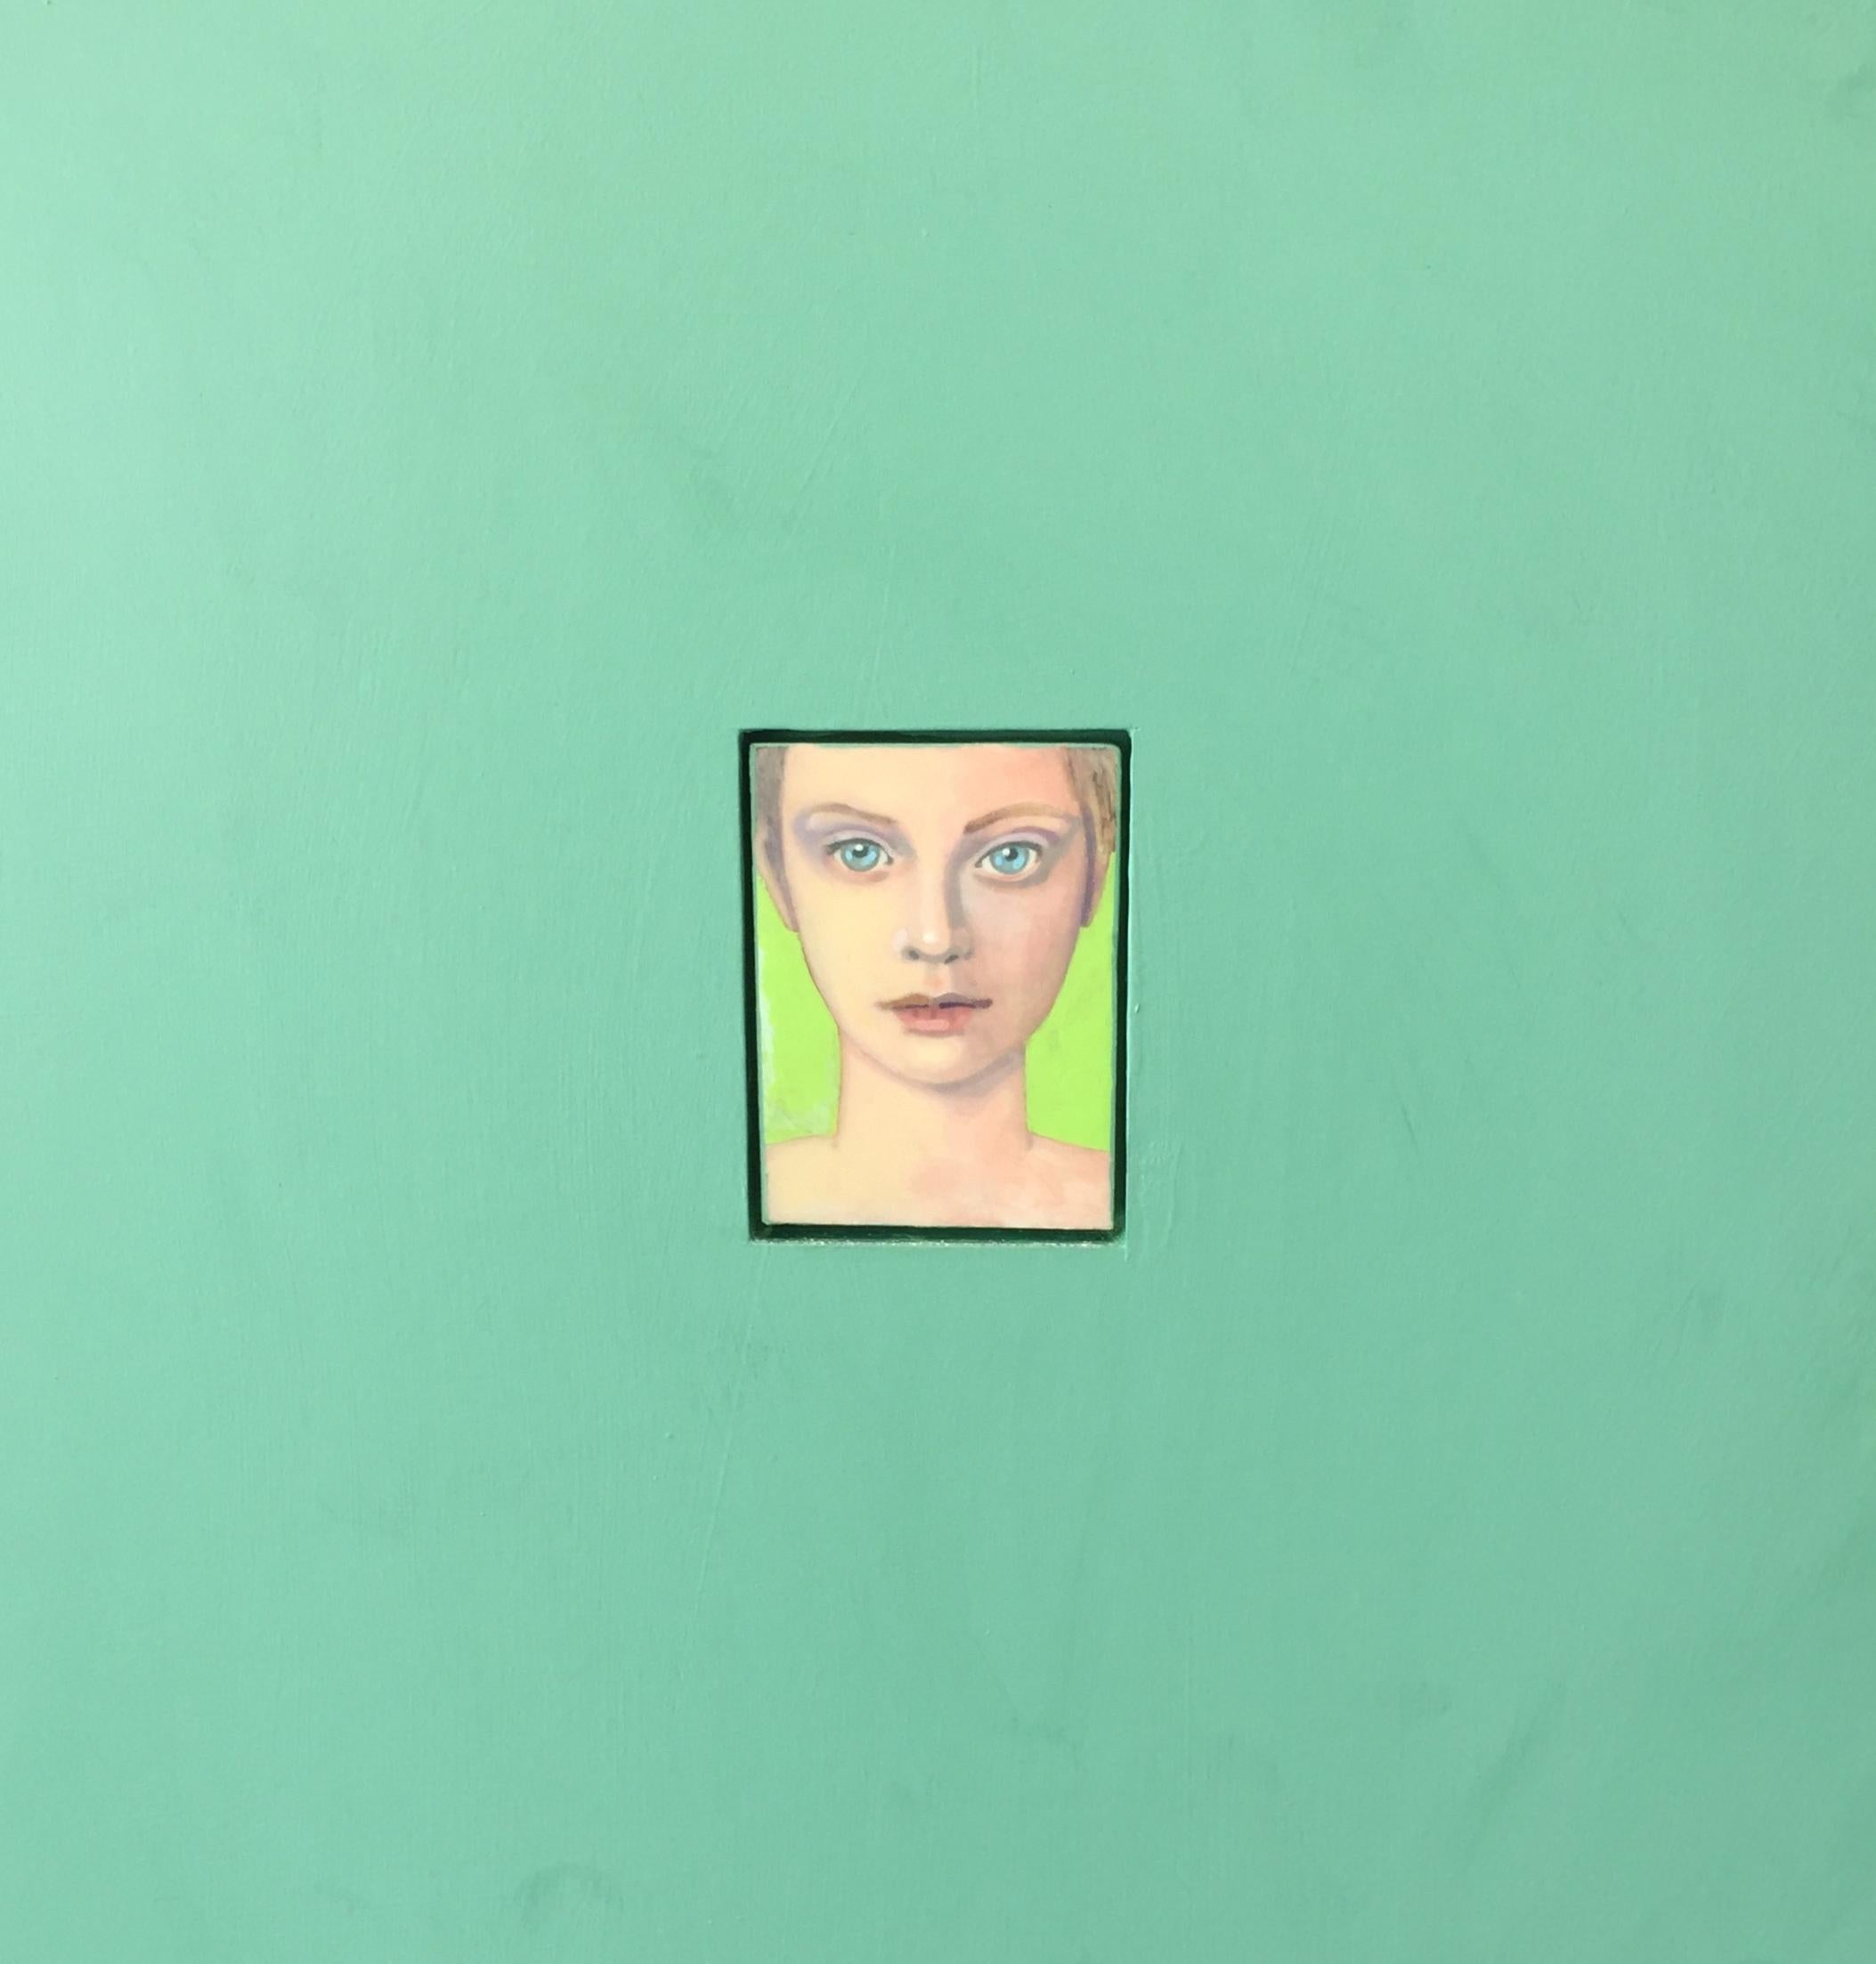 The model (PORTRAIT OF A YOUNG BLUE-EYED WOMAN, VIBRANT SEA GREEN BACKGROUND) - Painting by John MacWhinnie